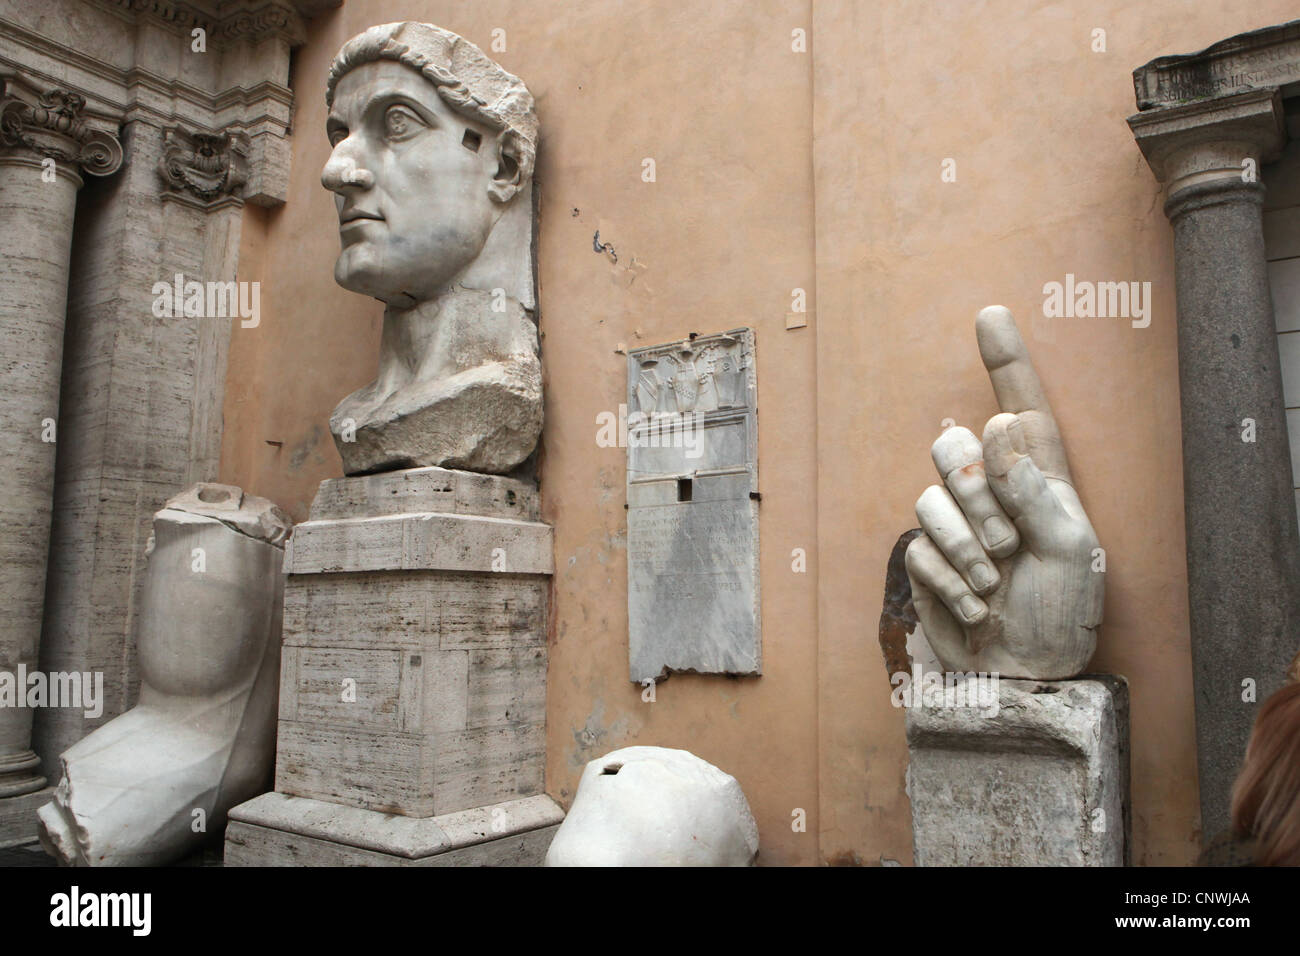 Colossal marble statue of Constantine the Great in the Capitoline Museums in Rome, Italy. Stock Photo